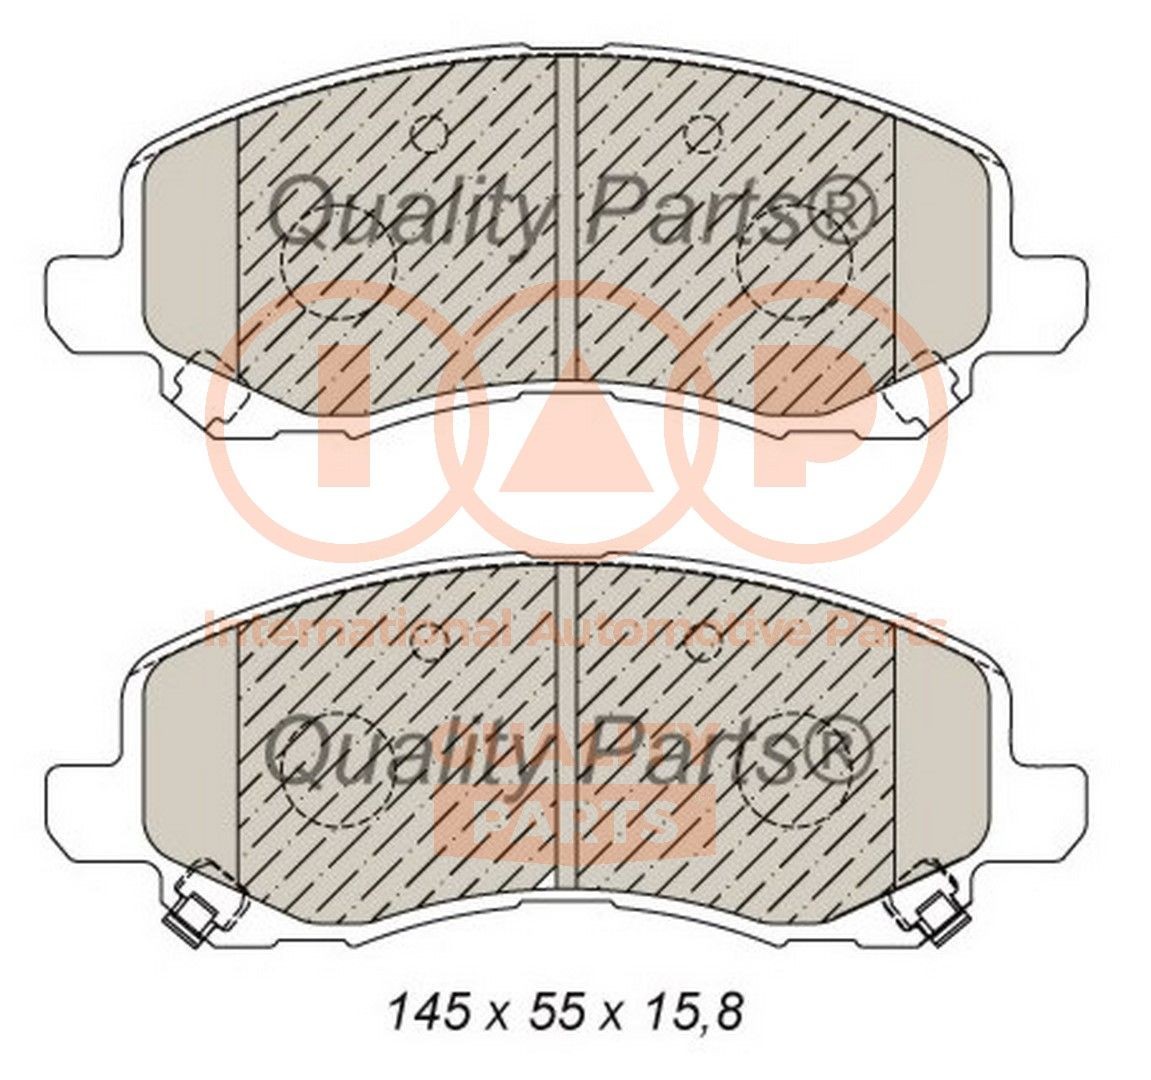 IAP QUALITY PARTS Front Axle Height 1: 54,9mm, Width 1: 144,8mm, Thickness 1: 16mm Brake pads 704-10070 buy